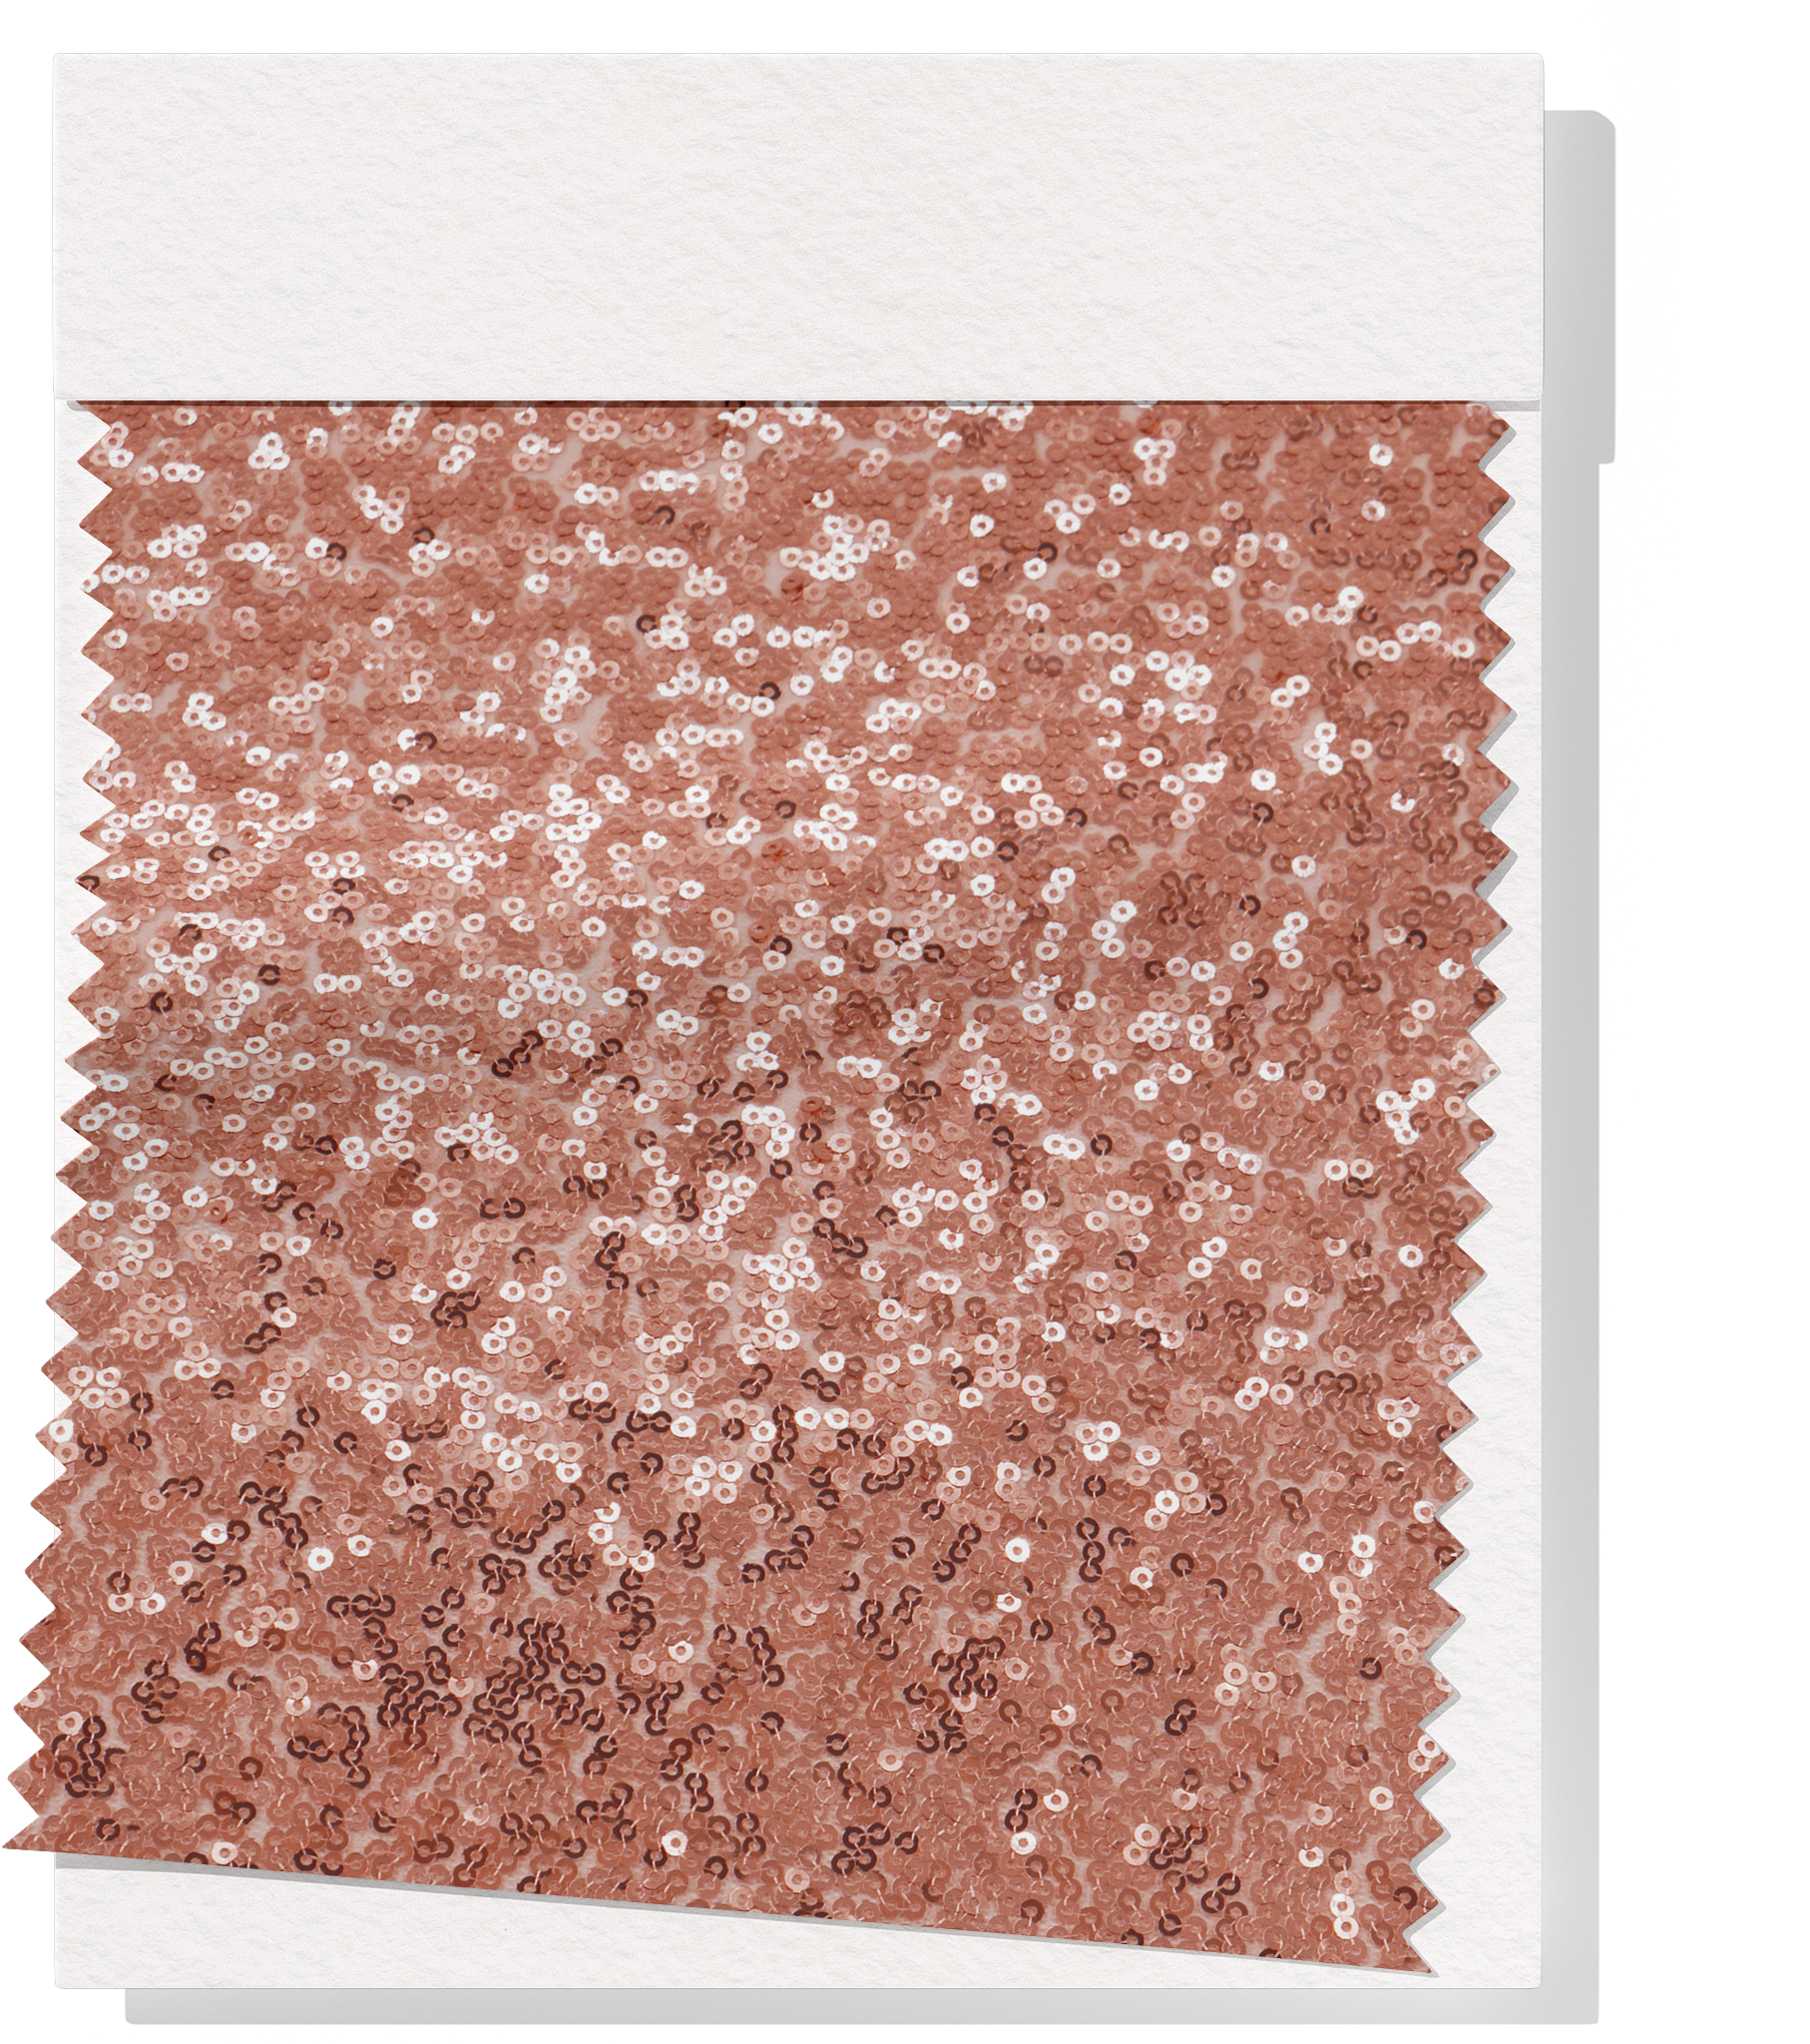 Polyester Mesh Sequins $25.00p/m - Rose Gold